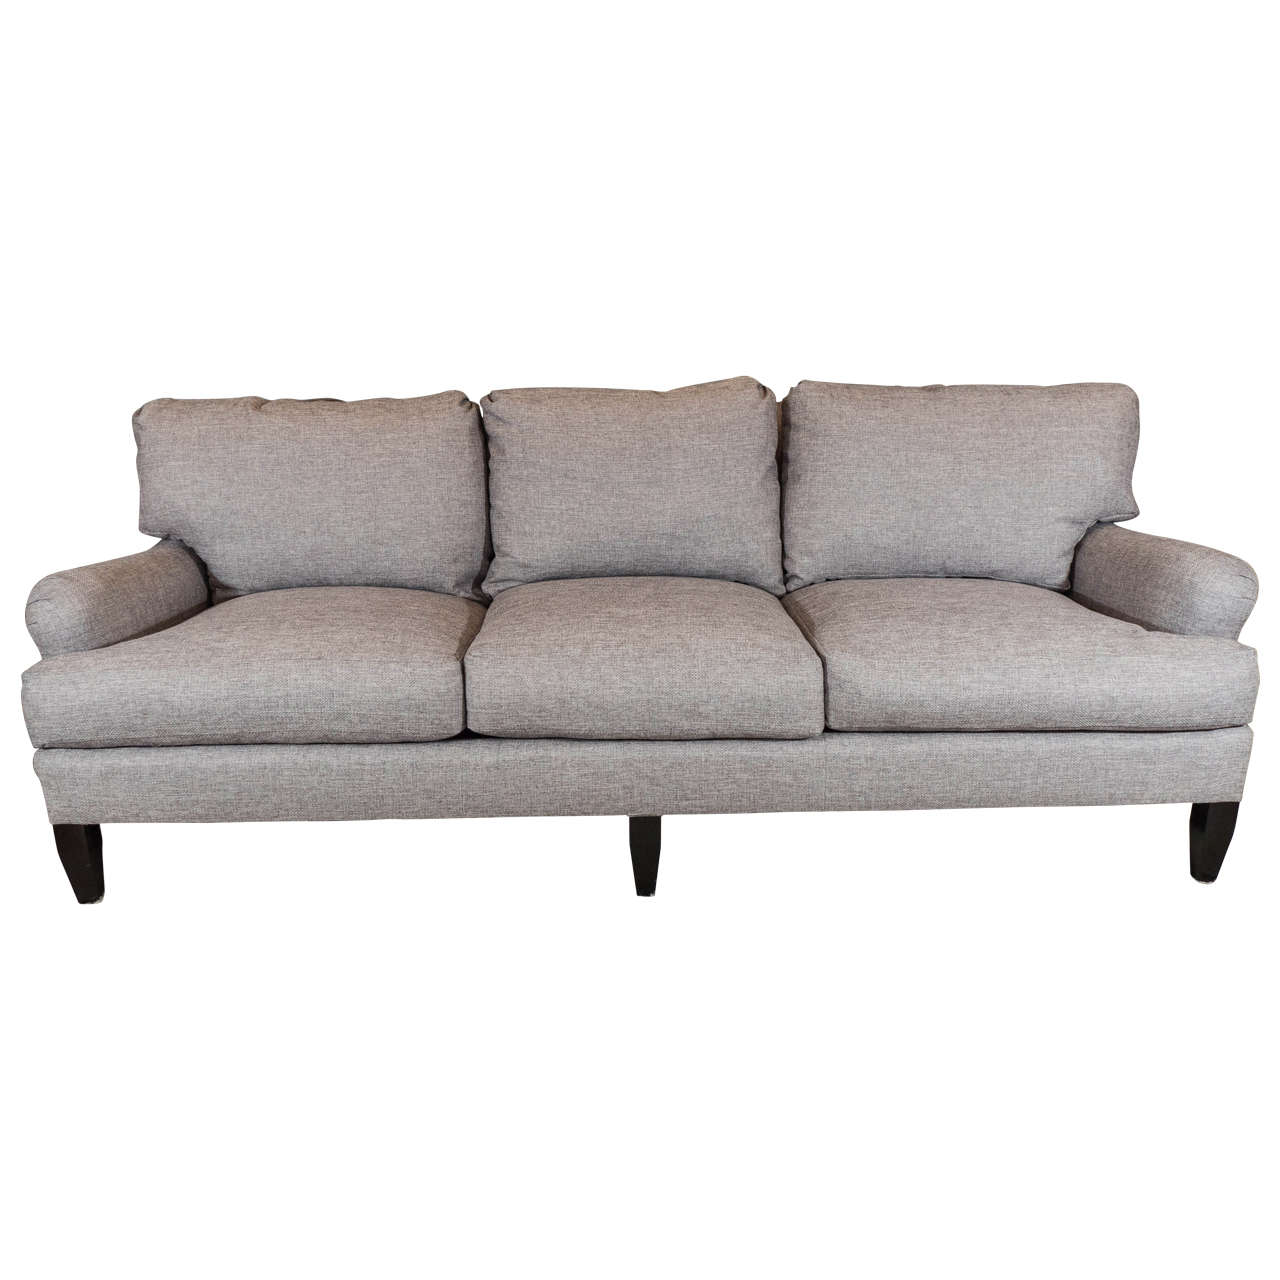 Late 20th Century English Arm Sofa in Grey Linen and Down Cushions